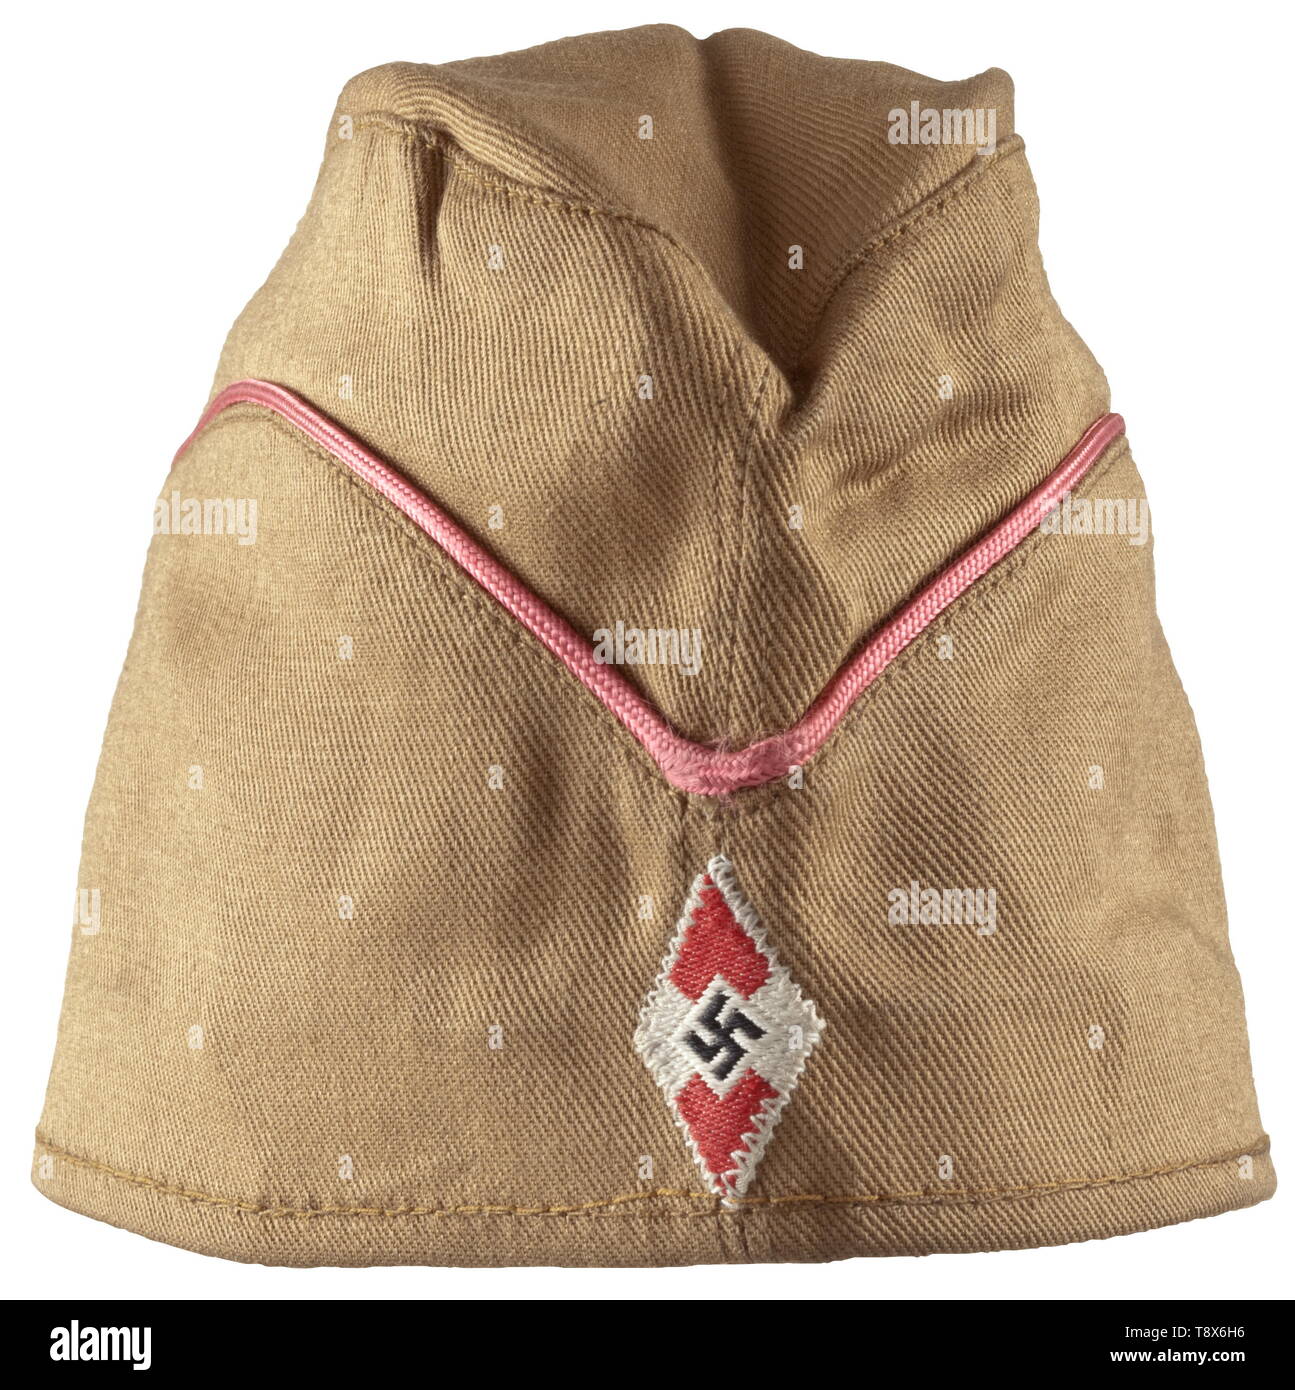 A side cap for members of the motorised HJ Sand-coloured cloth, pink piping, woven HJ emblem, brown inner liner with RZM cloth tag (an incorrect BDM tag sewn-in by the maker). historic, historical, 20th century, Additional-Rights-Clearance-Info-Not-Available Stock Photo